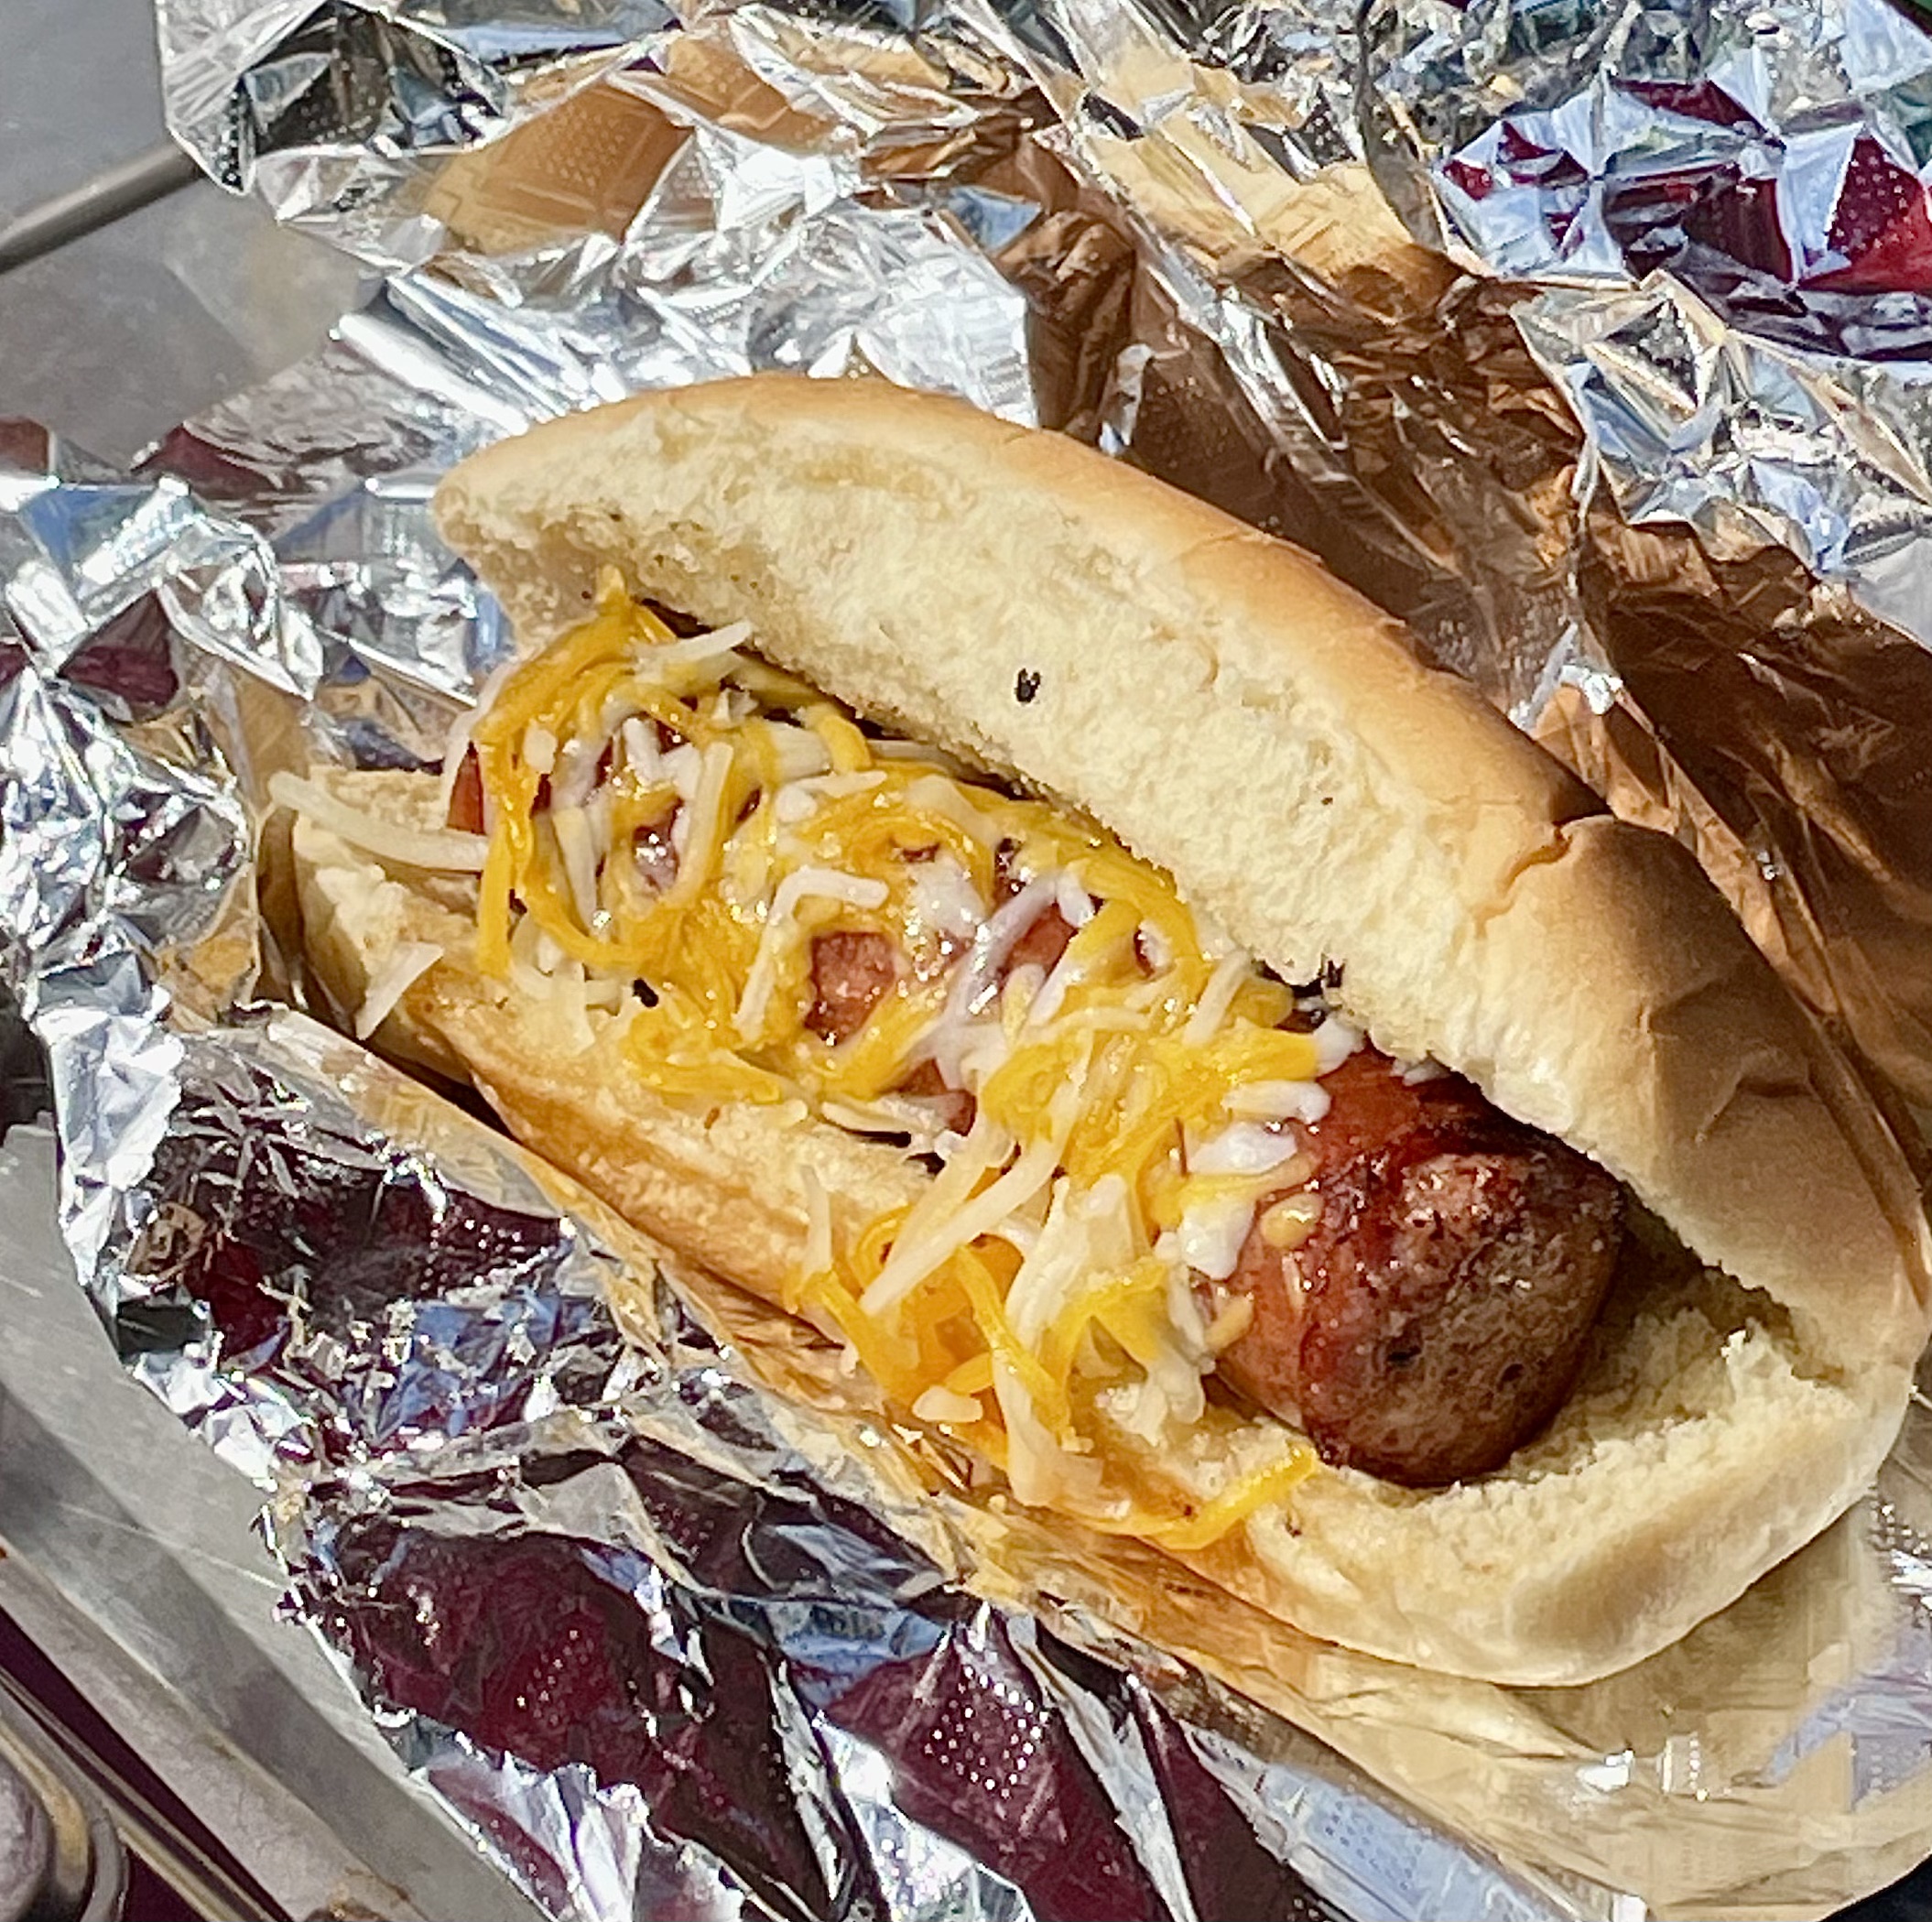 Conecuh Sausage Dawg